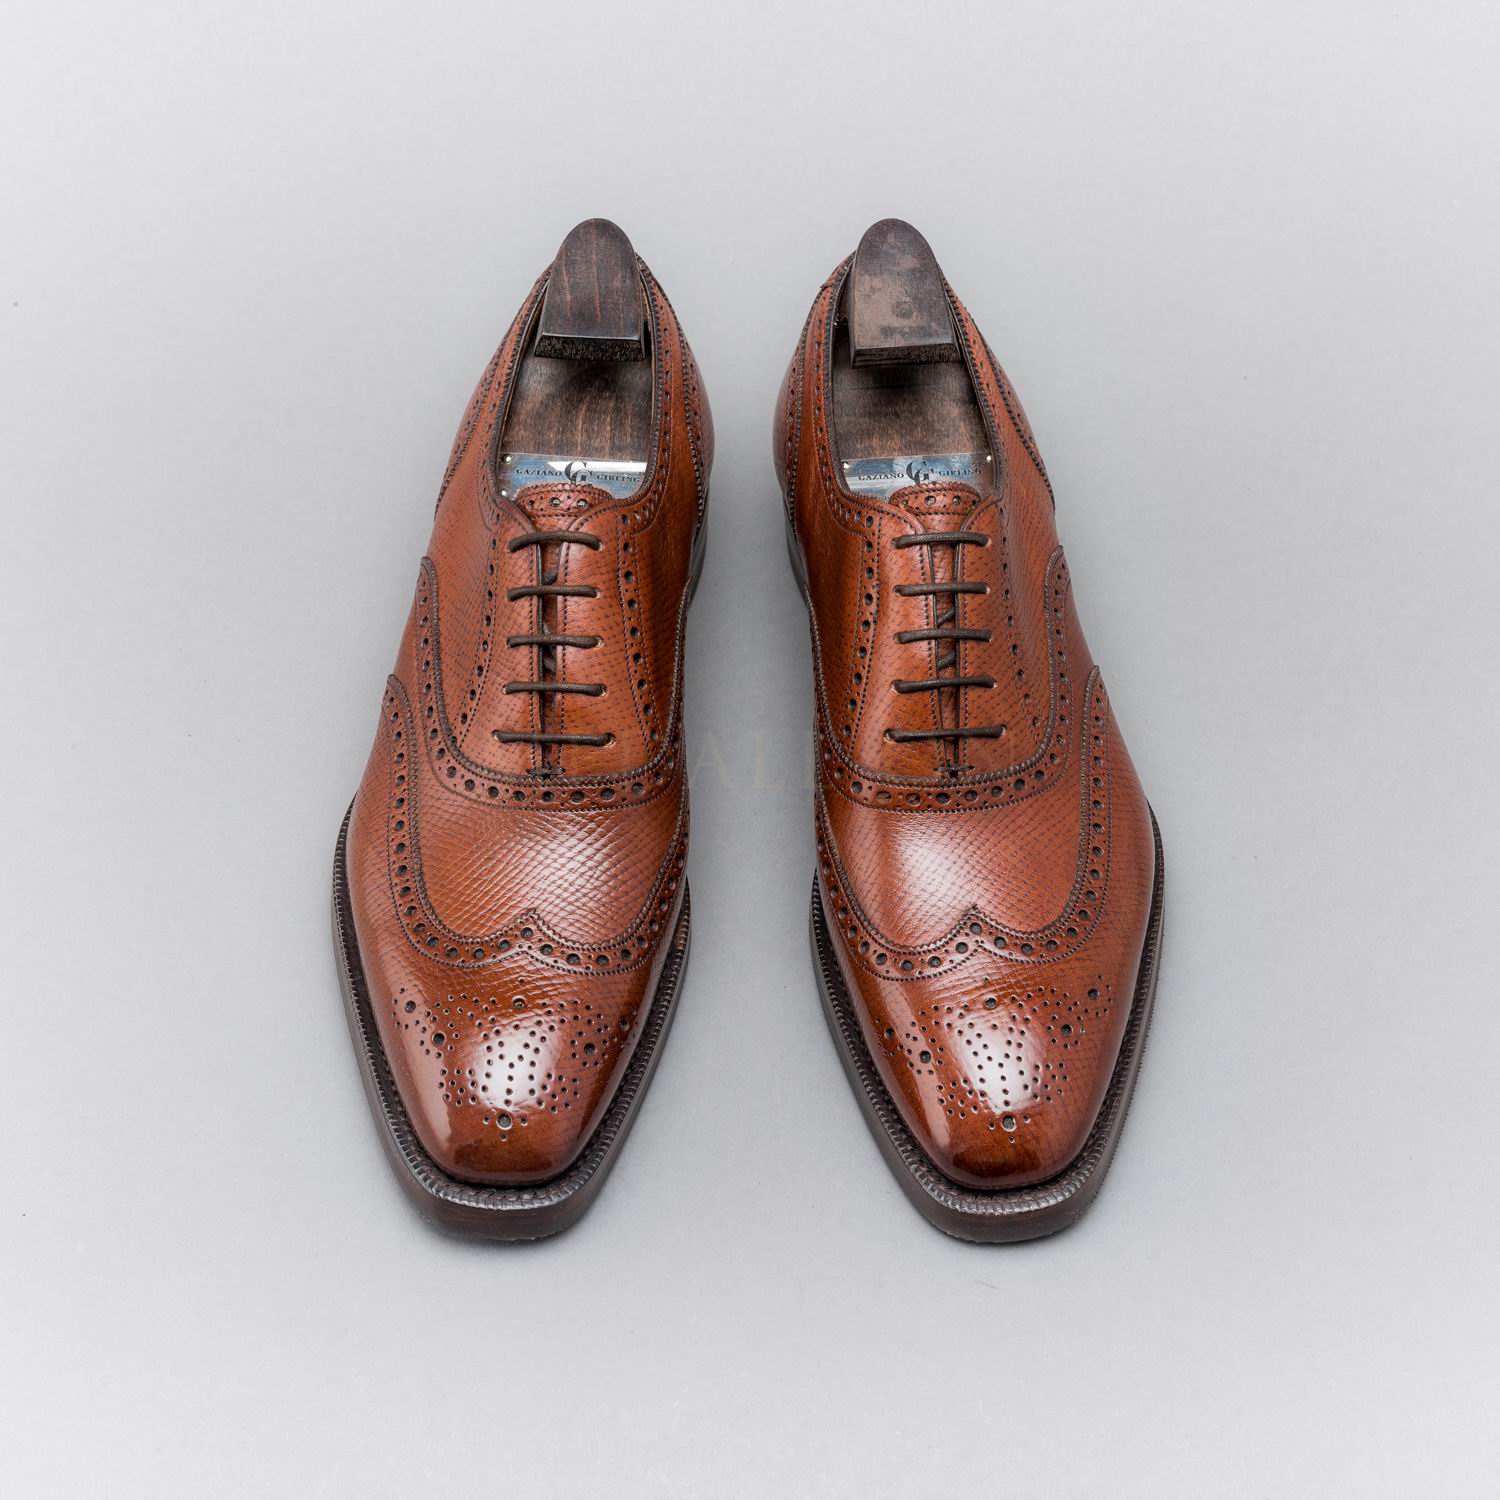 Gaziano&Girling, Rothschild, Full-Brogue Oxford, England – Medallion Shoes